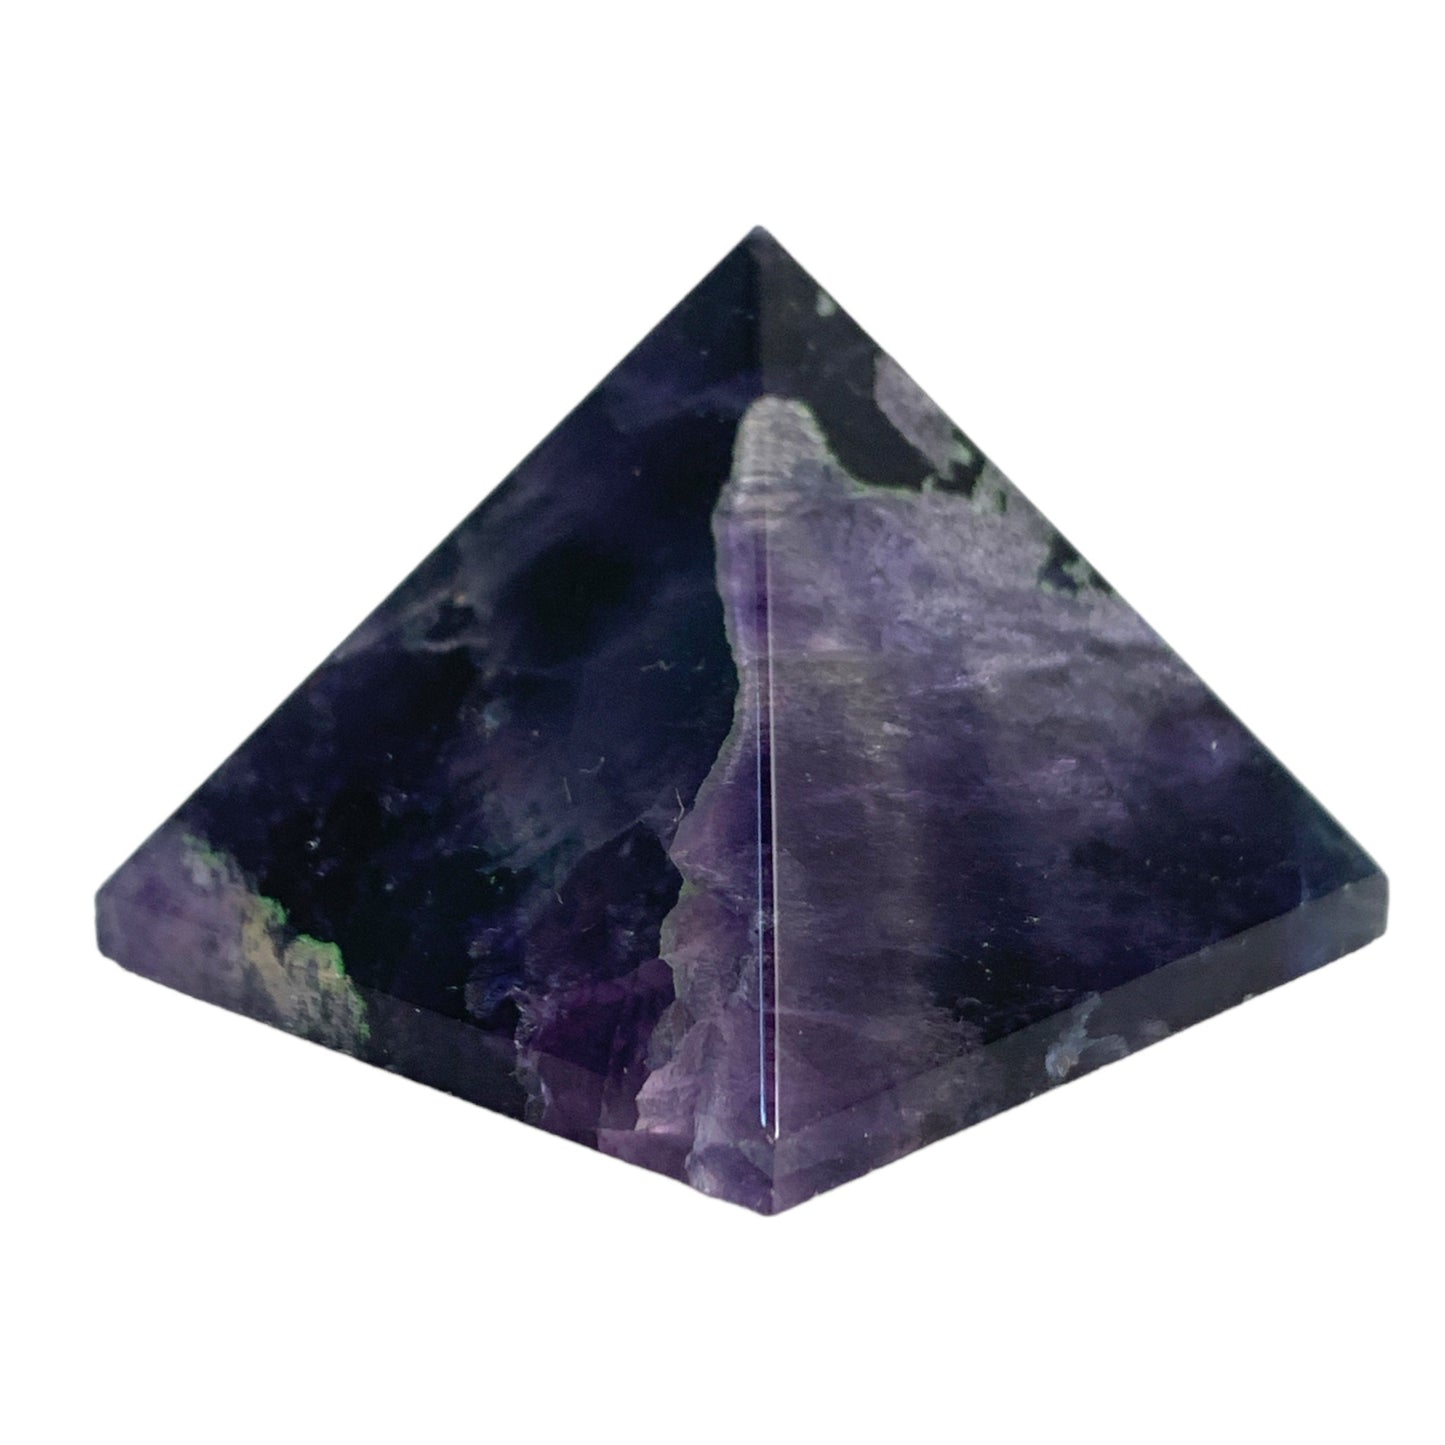 Fluorite Purple Banded- 35 to 70mm - Price per gram per piece (B2B ordering 1 = 1 piece so we charge Ex. 60g = $4.80 each)